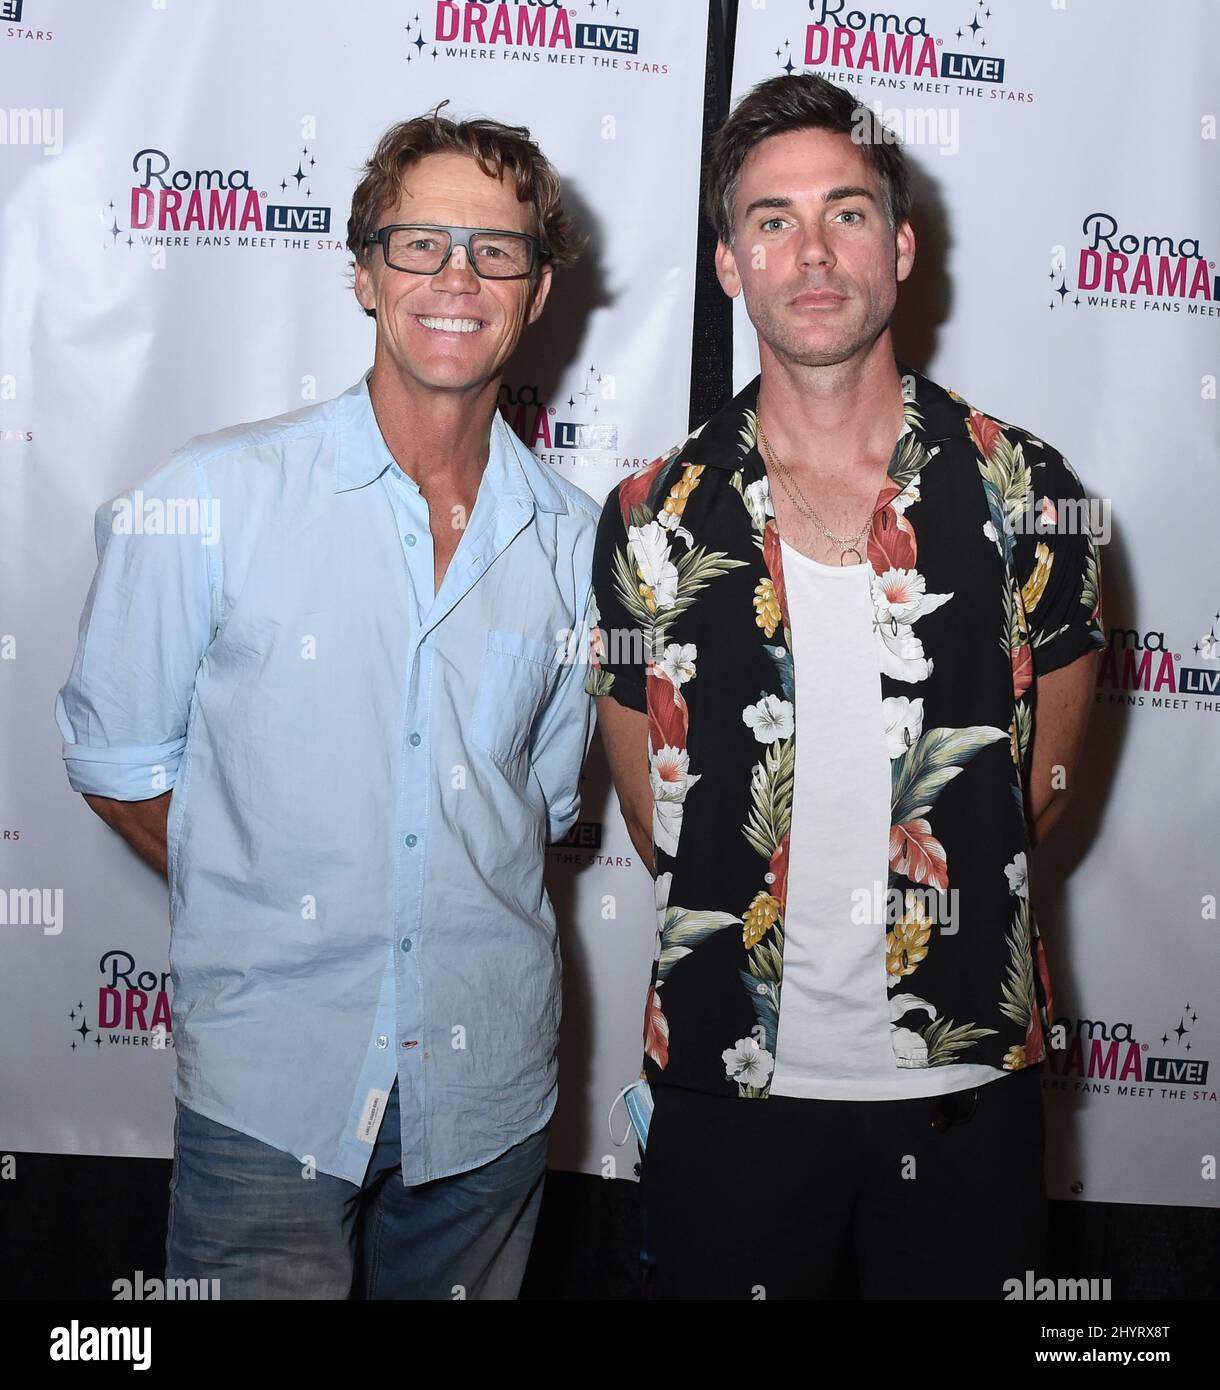 Brian Krause and Drew Fuller at the opening day of RomaDrama LIVE! Fan Convention held at The Factory at Franklin on July 30, 2021 in Franklin, TN. Stock Photo